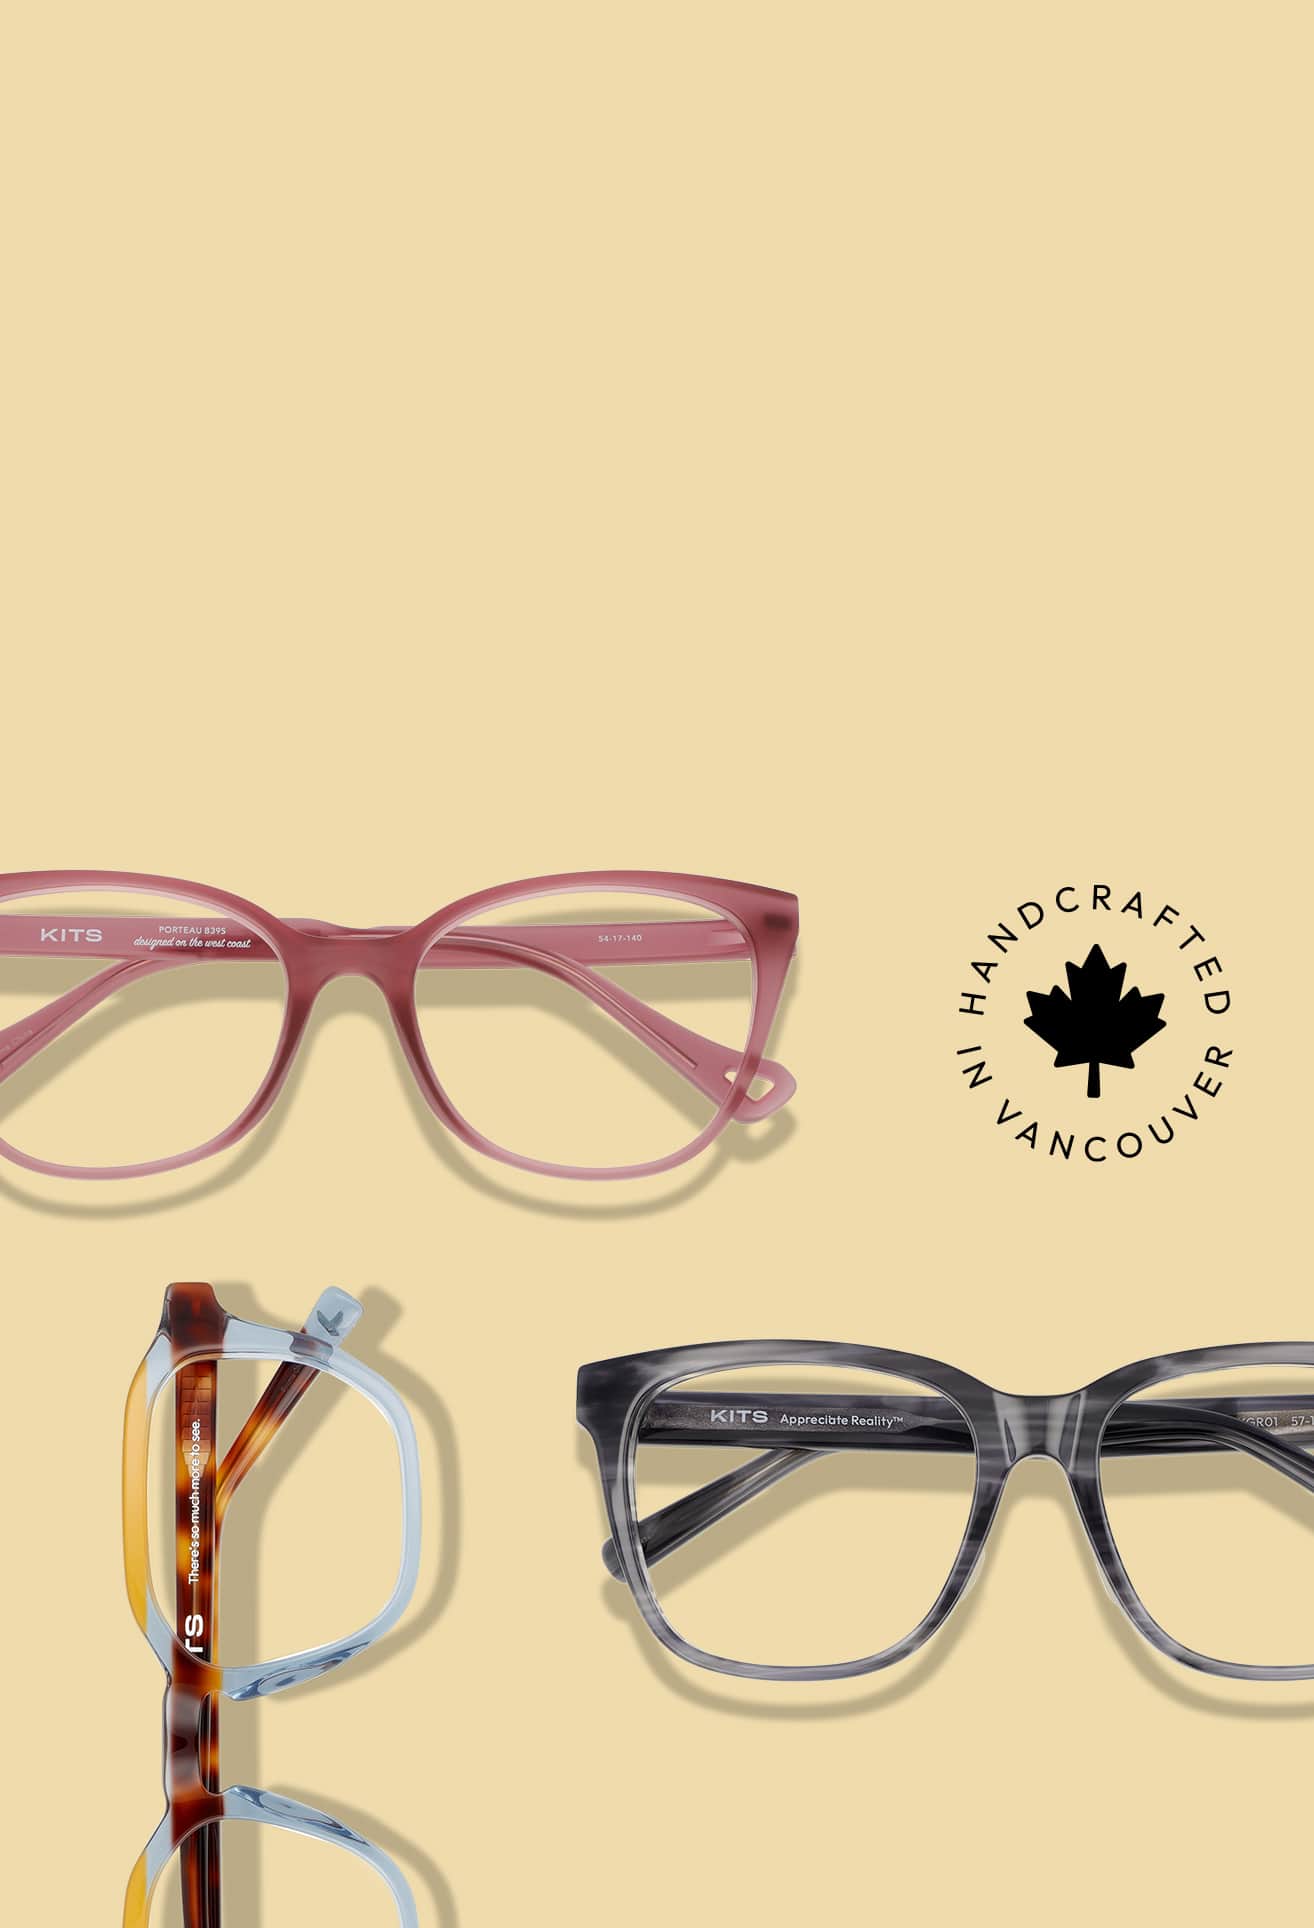 All kits glasses are $28